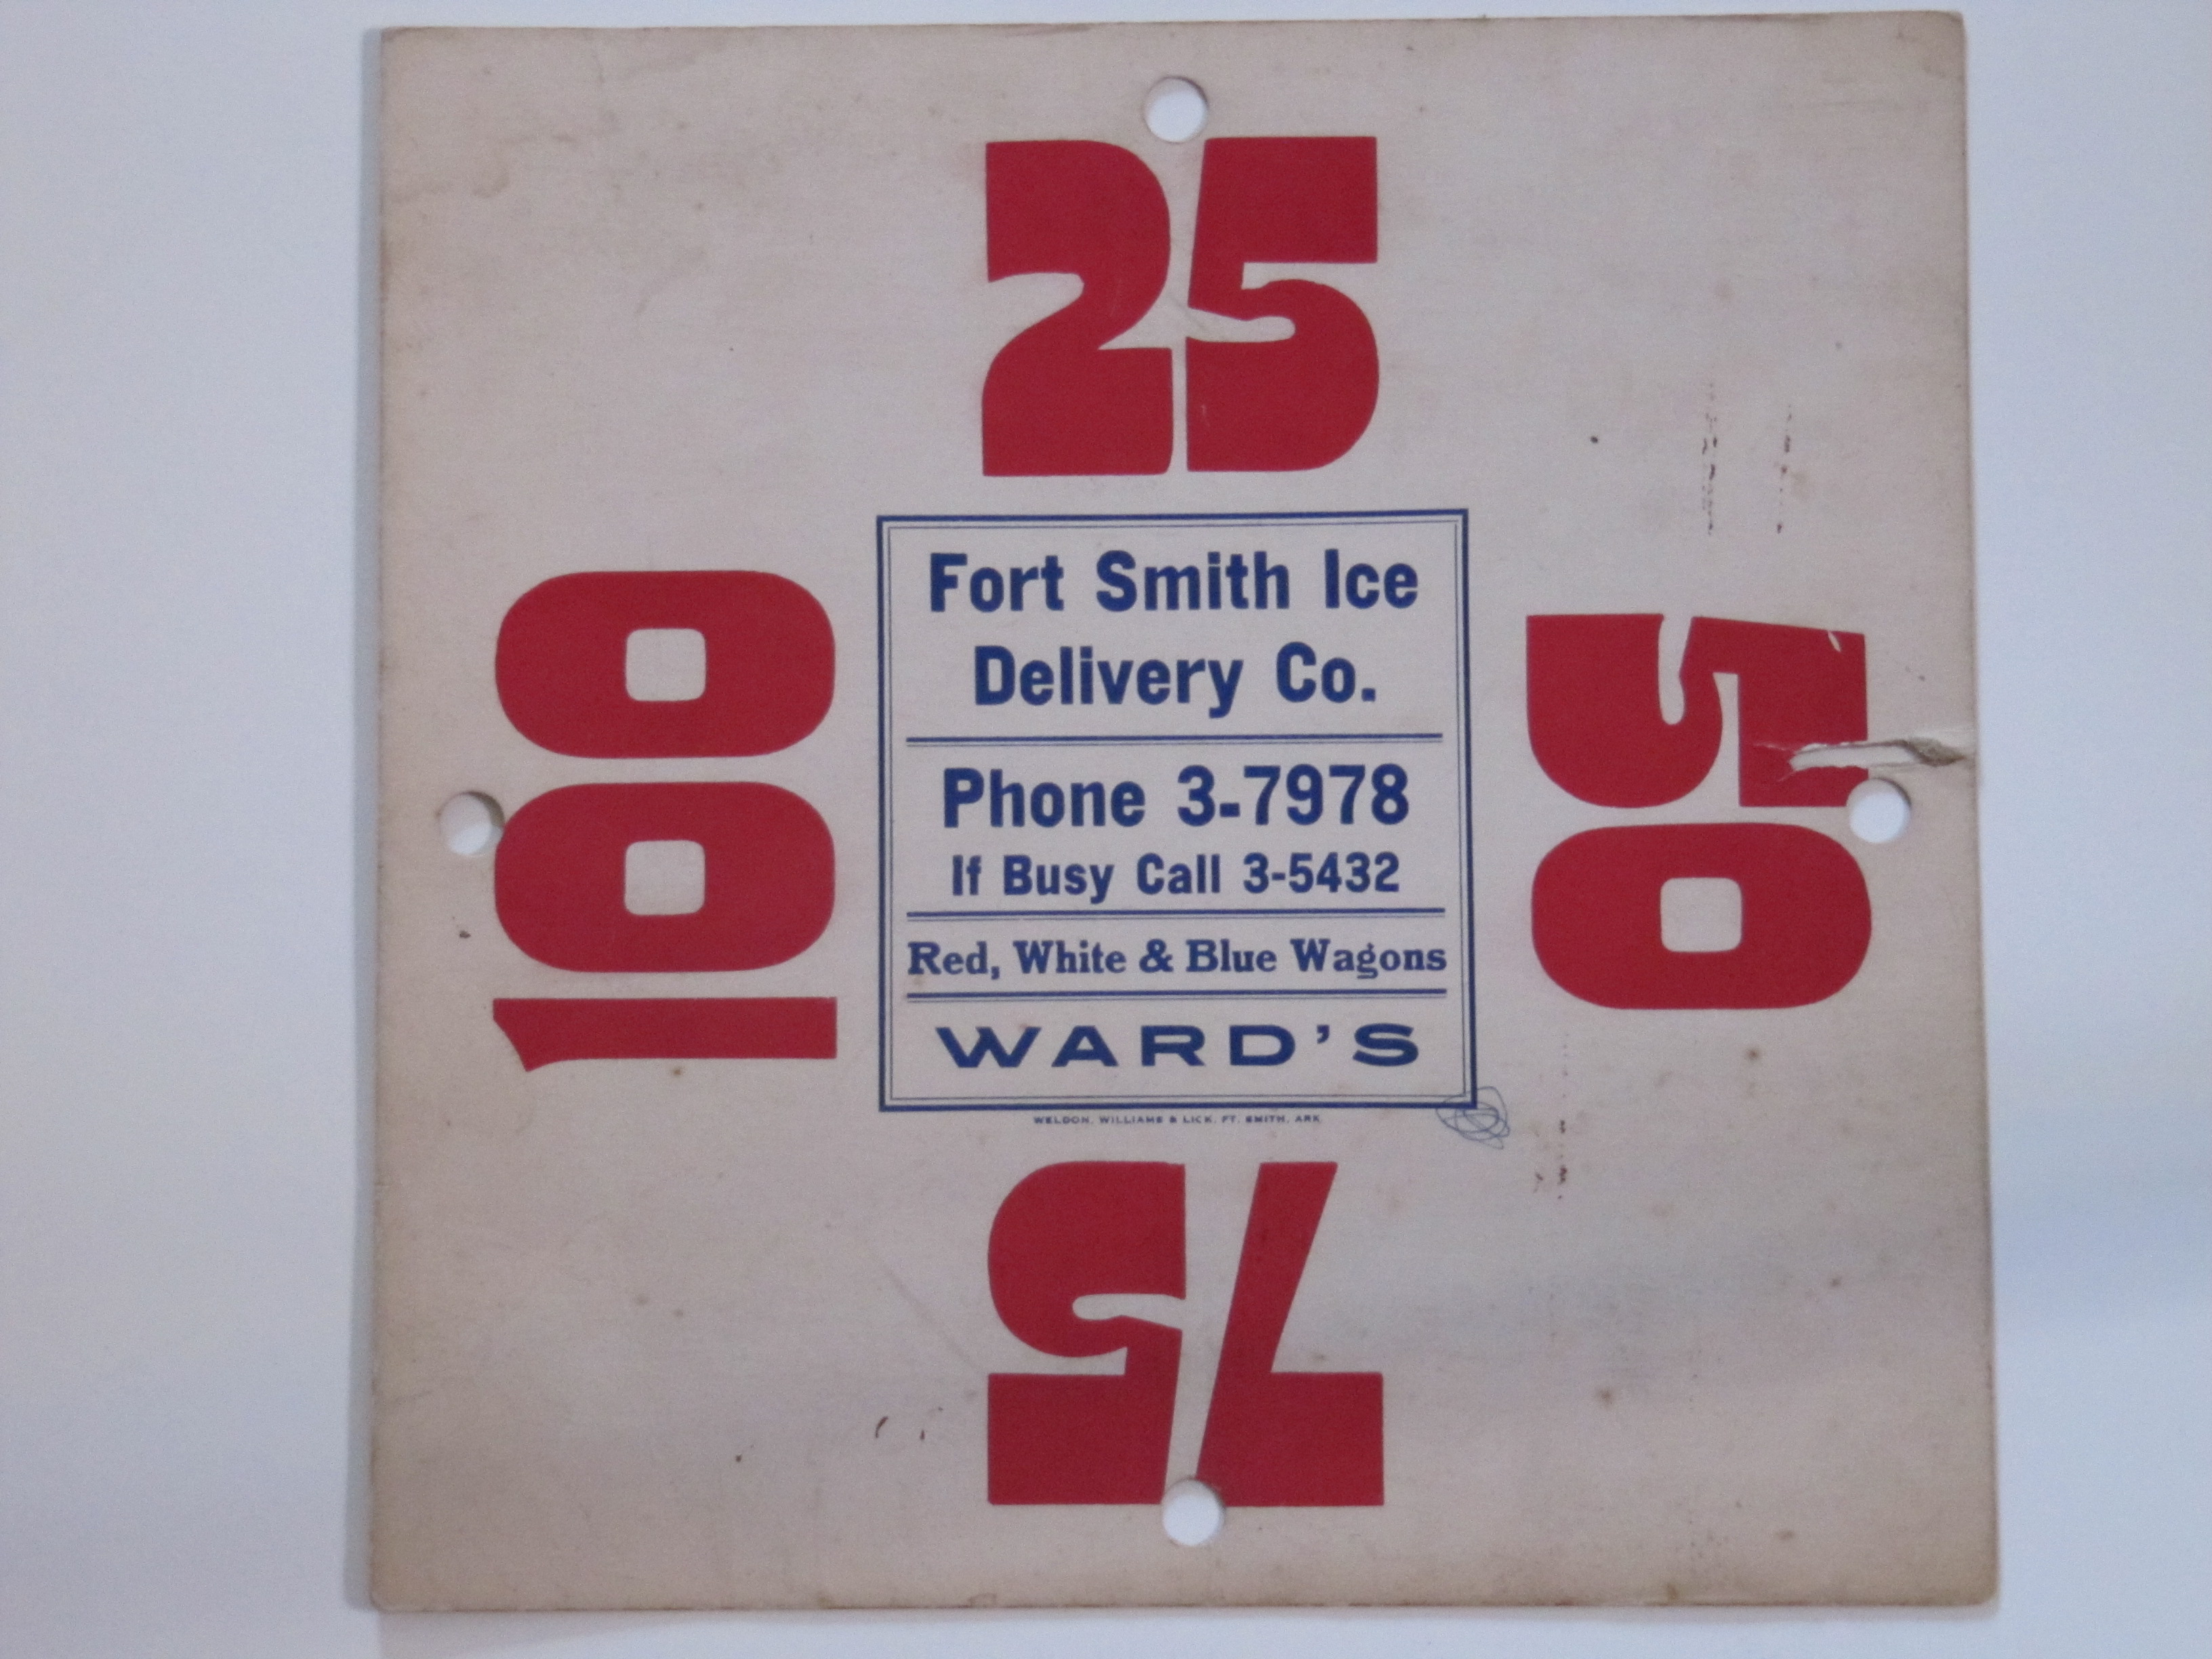 Fort Smith Ice Delivery Co.